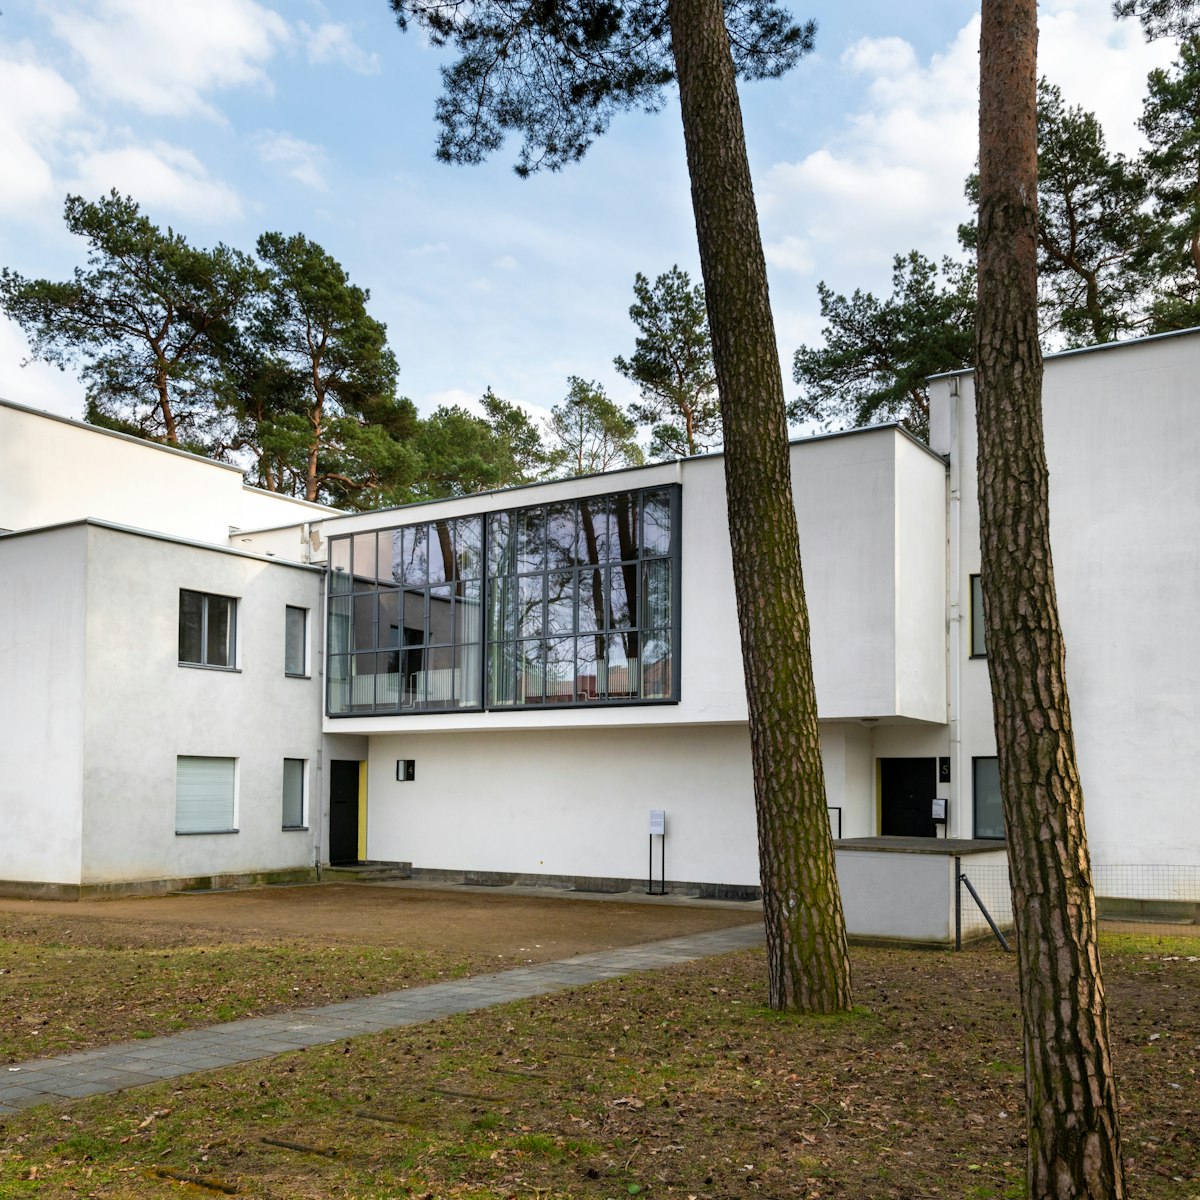 The Bauhaus master house building designed by architect Walter Gropius in 1925, Dessau, Germany.